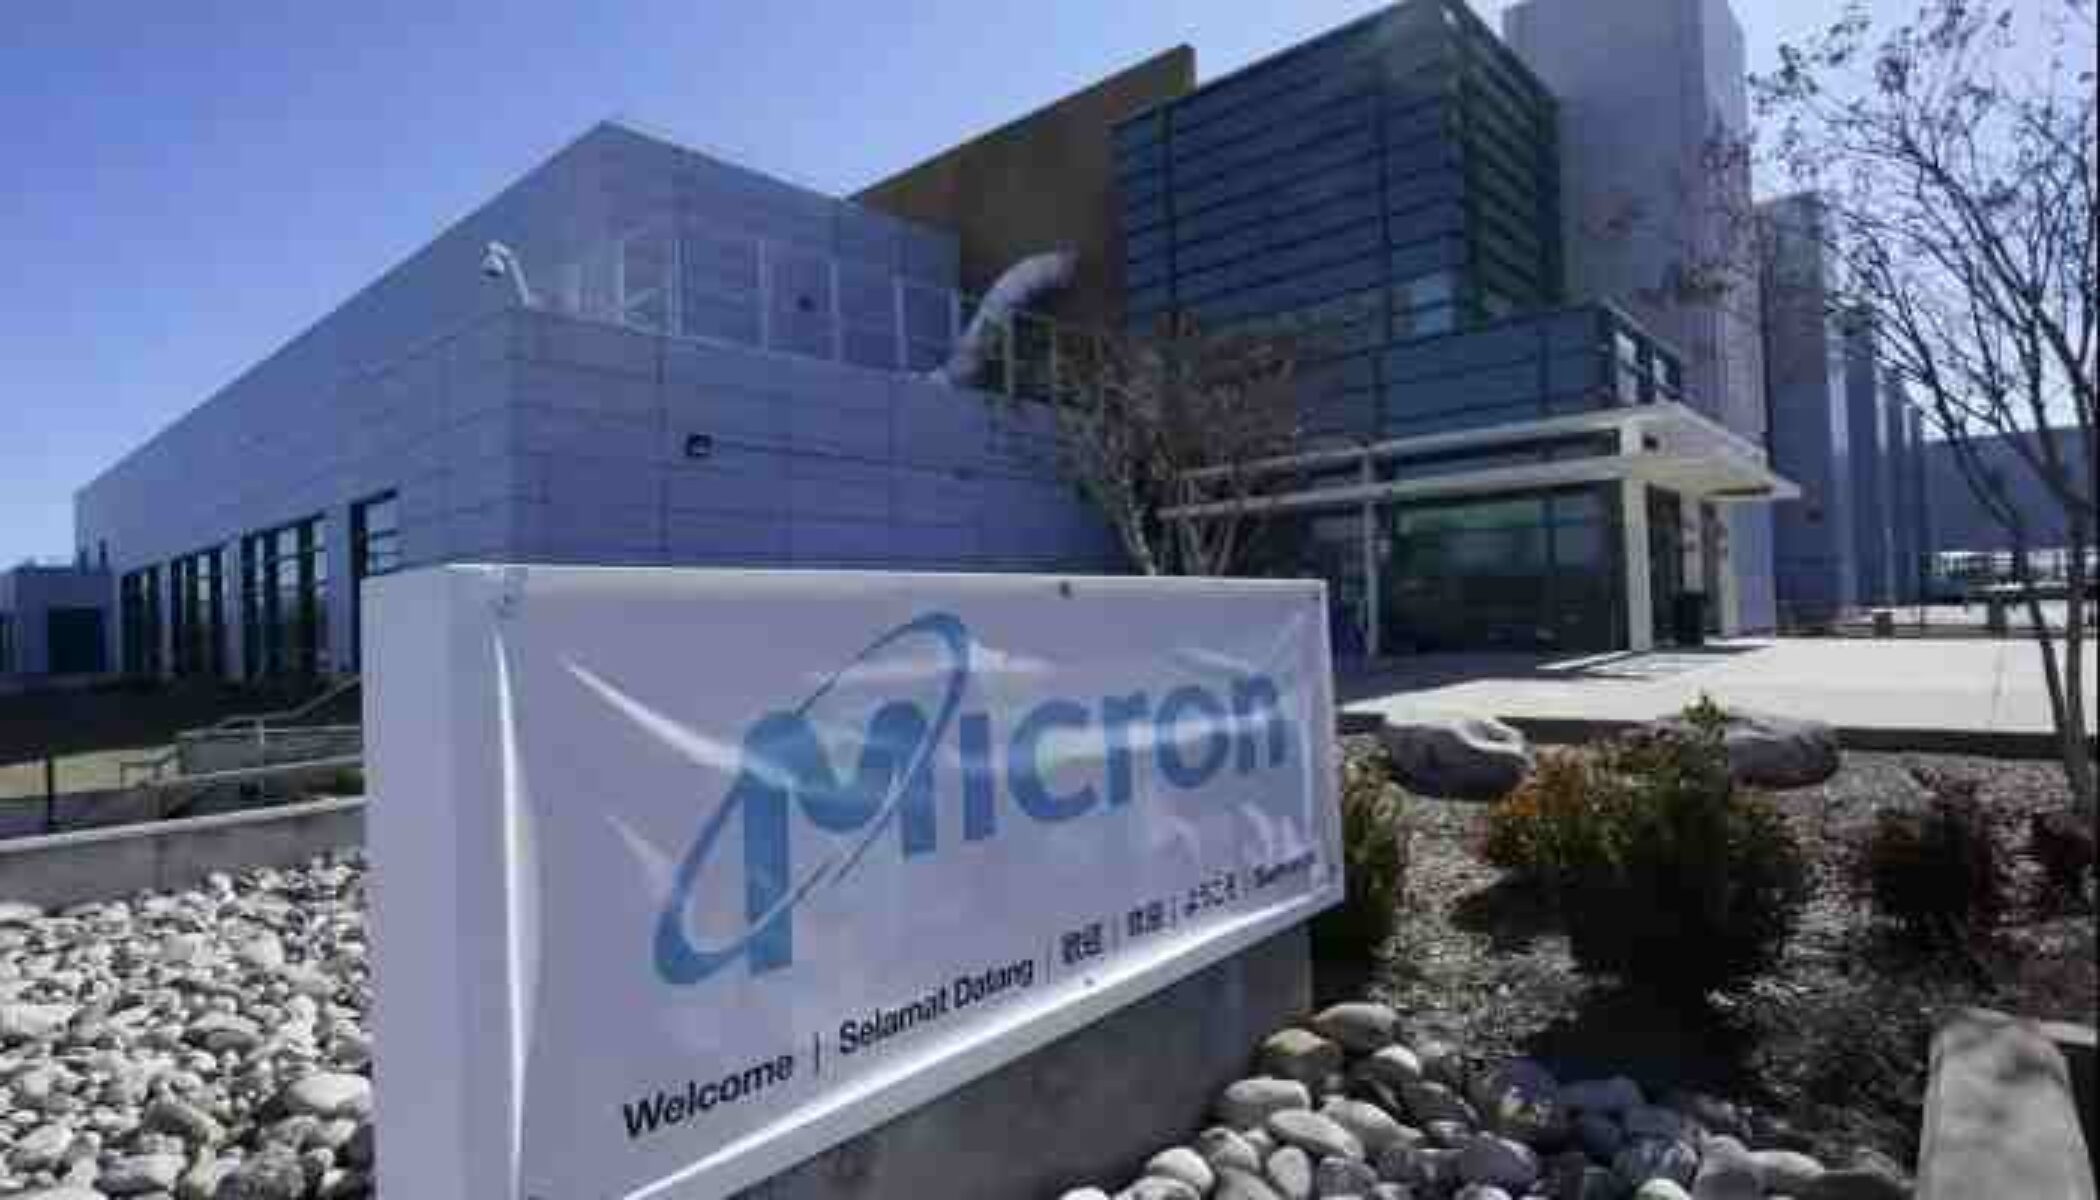 Micron to layoff 5,000 employees in 2023 HR Talk